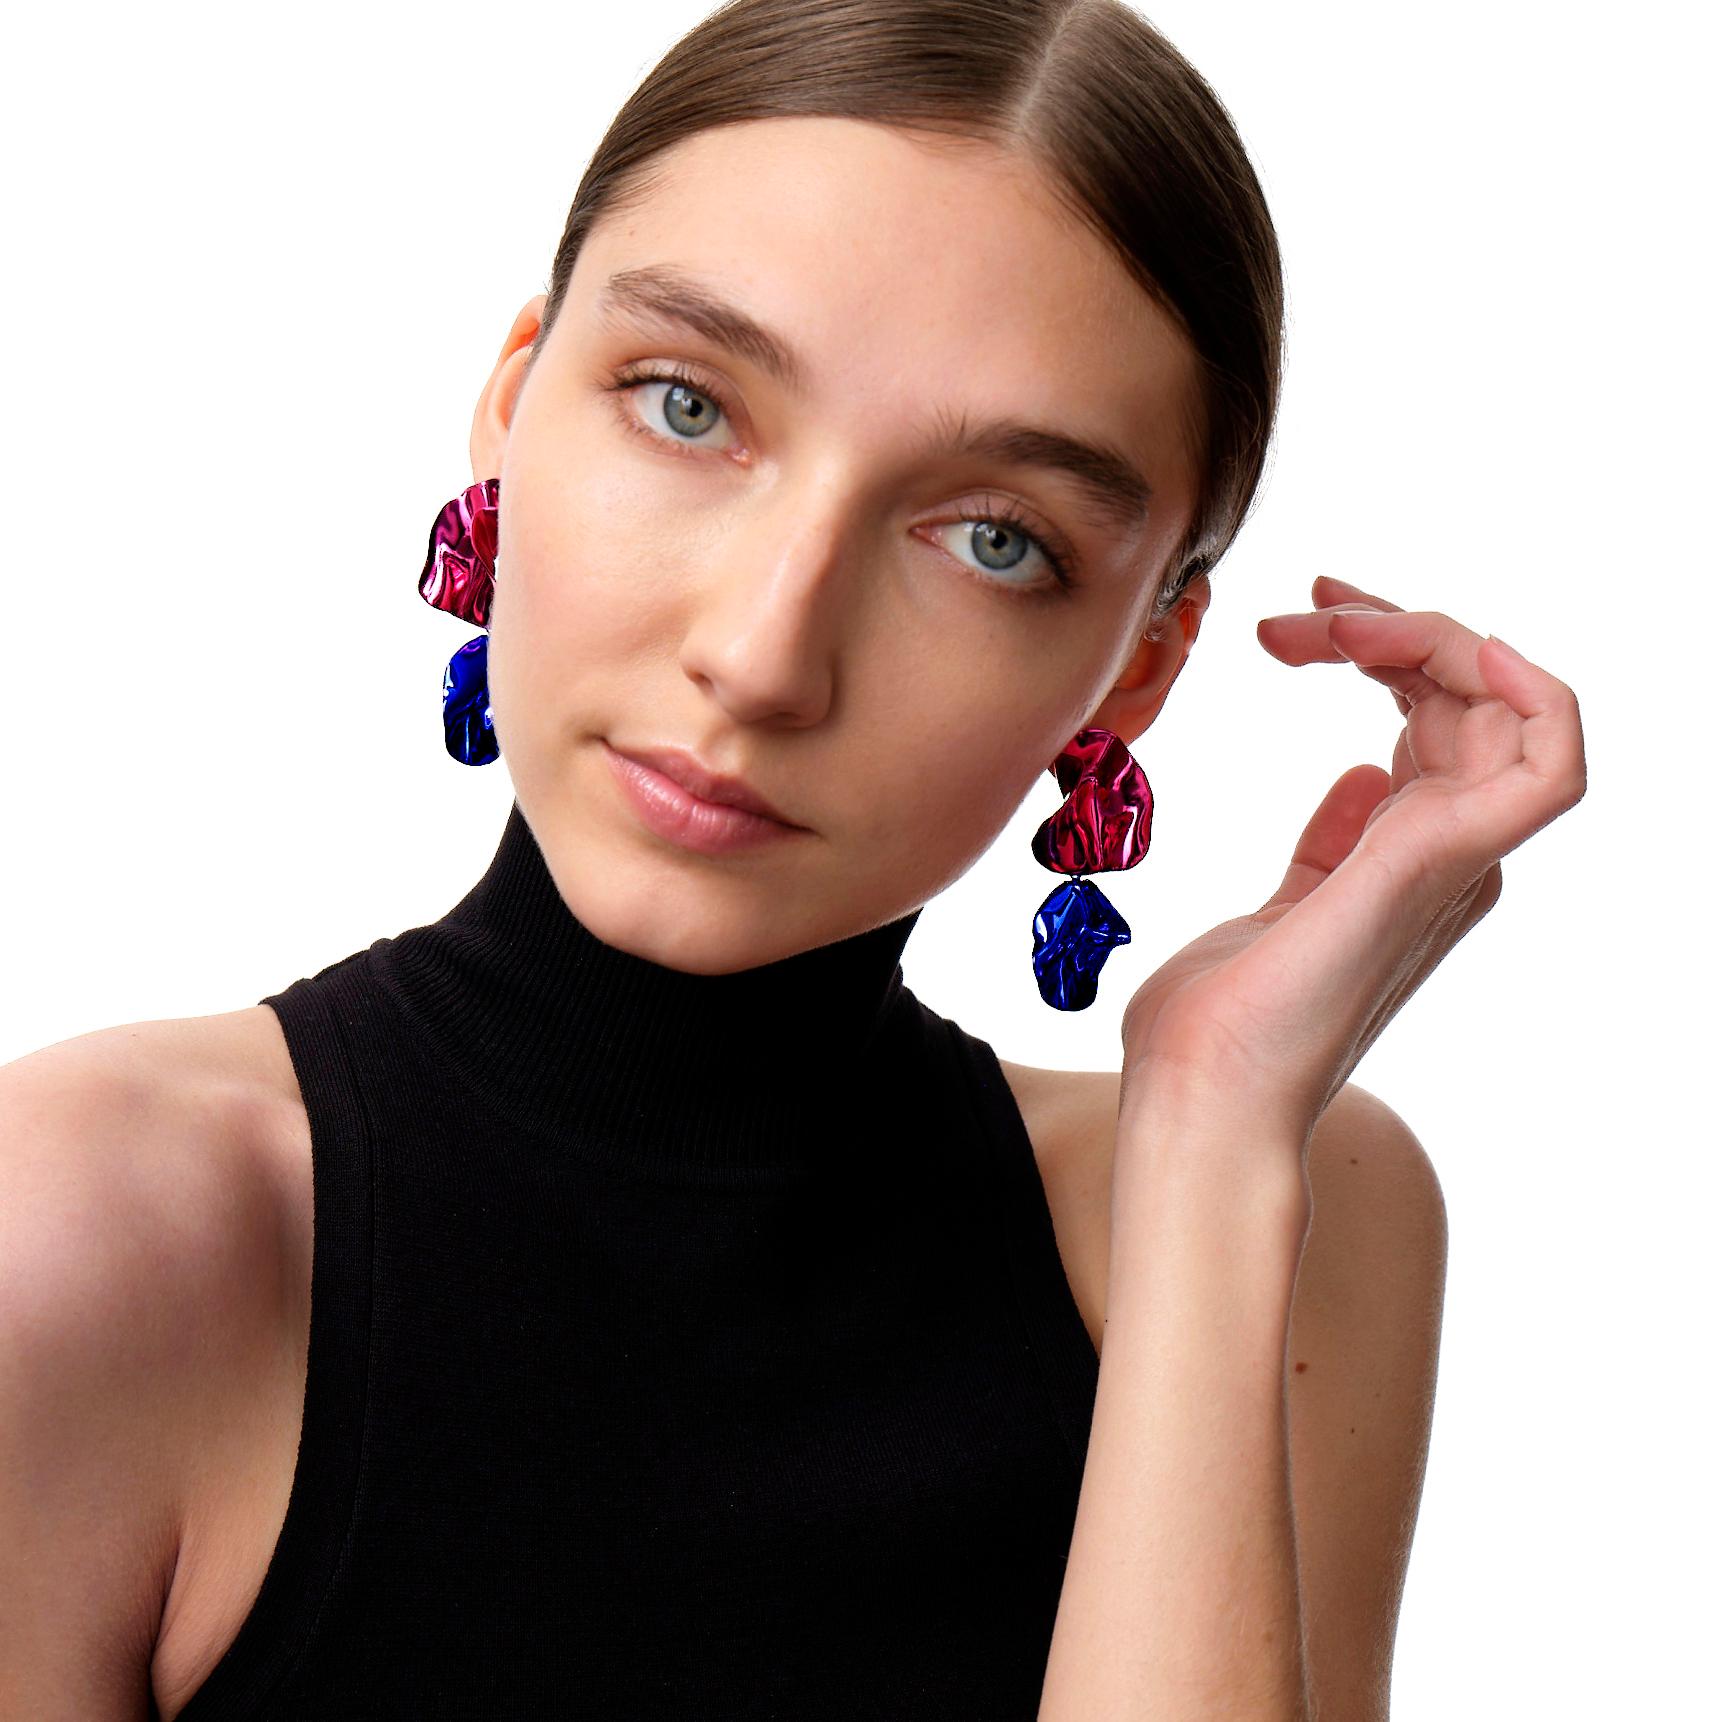 The Fold Earrings are sculptural folded earrings in vibrant metallic Fuchsia and Cobalt Blue. Their intricate folds are highlighted by the high-polished Mirror Finish. Wear them for a pop of color this fall.

Ceramic coated
Sterling silver post and